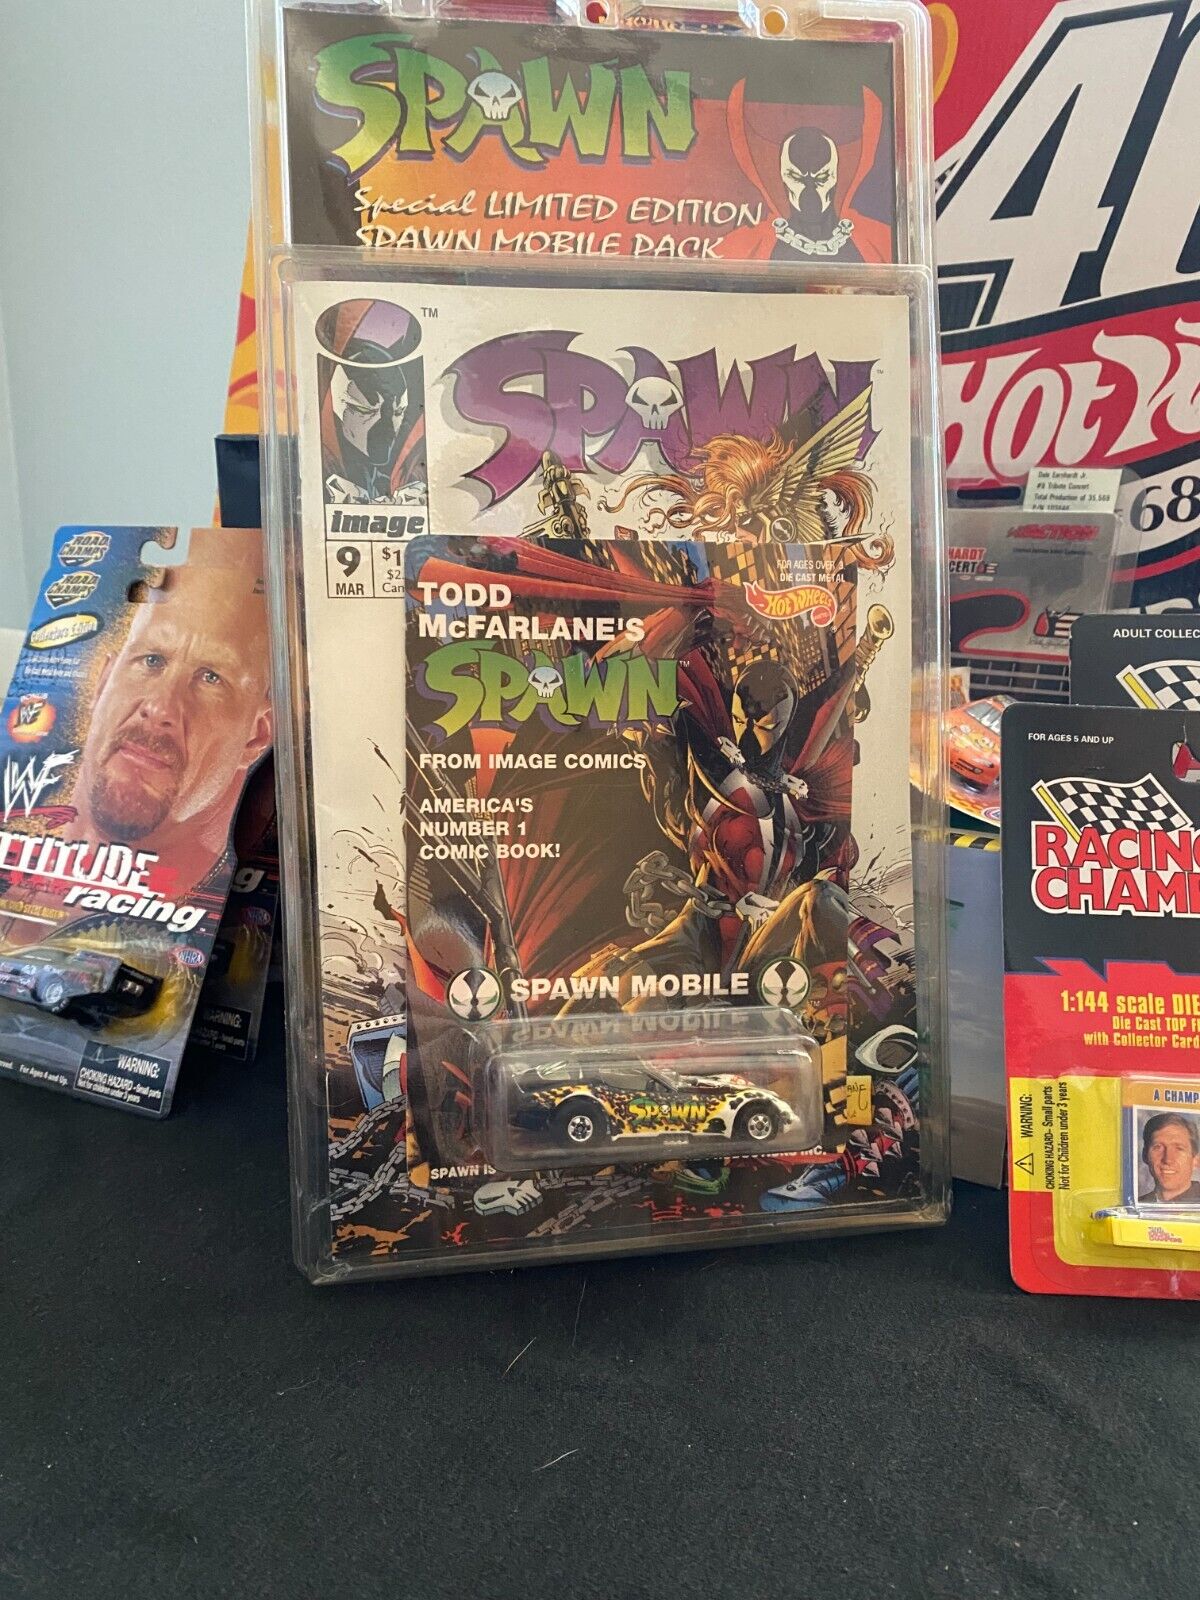 Hot Wheels SPAWN MOBILE funny car 1/5000 with SPAWN Image Comic #9 MISP 1993